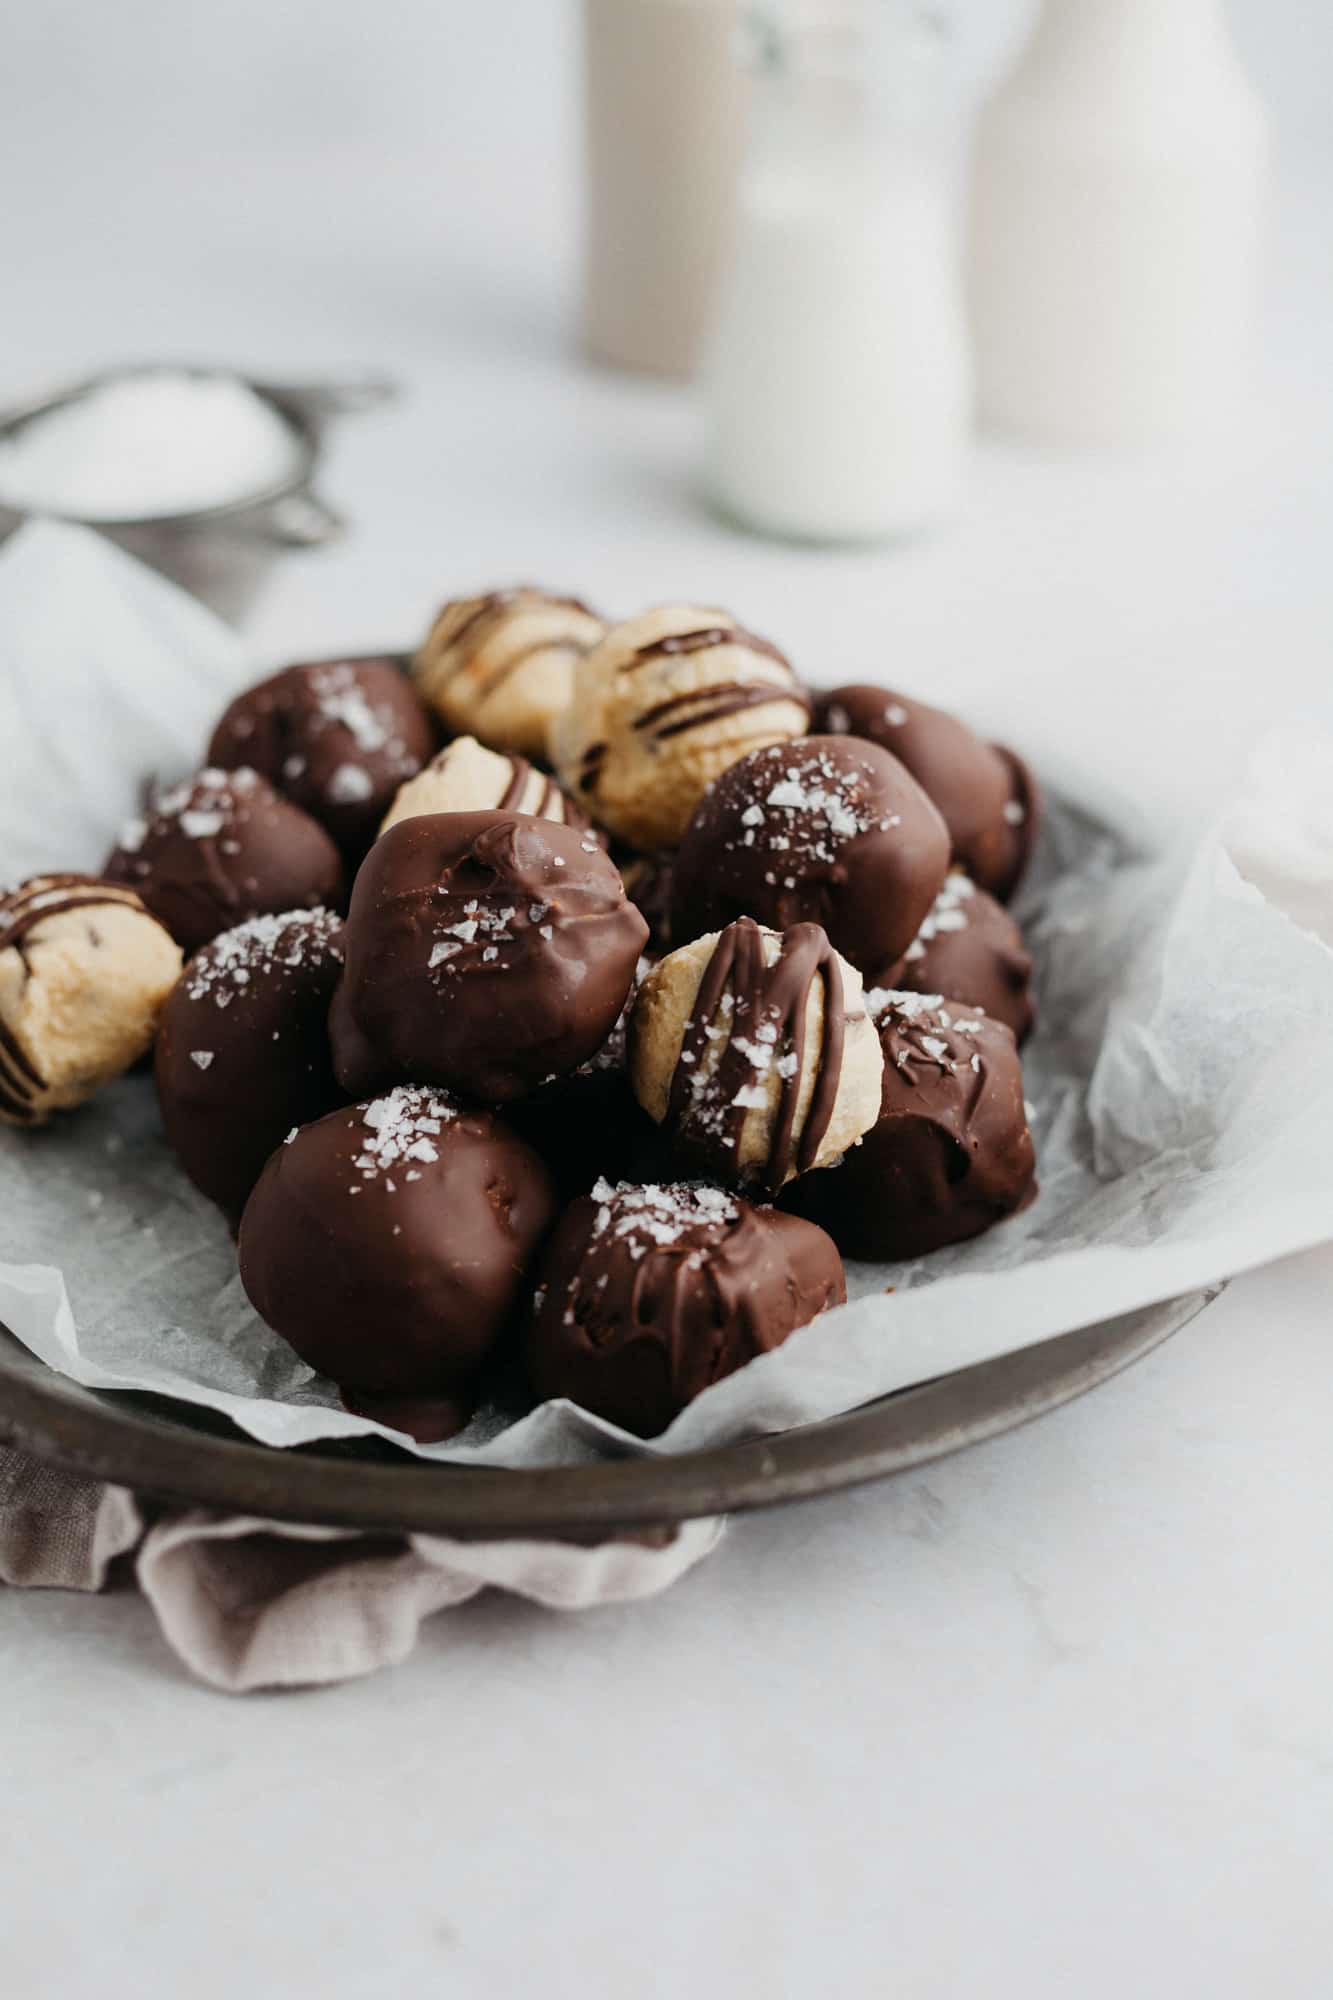 Cookie dough bites dipped in chocolate and sprinkled with sea salt on parchment paper. One has a taken out of it